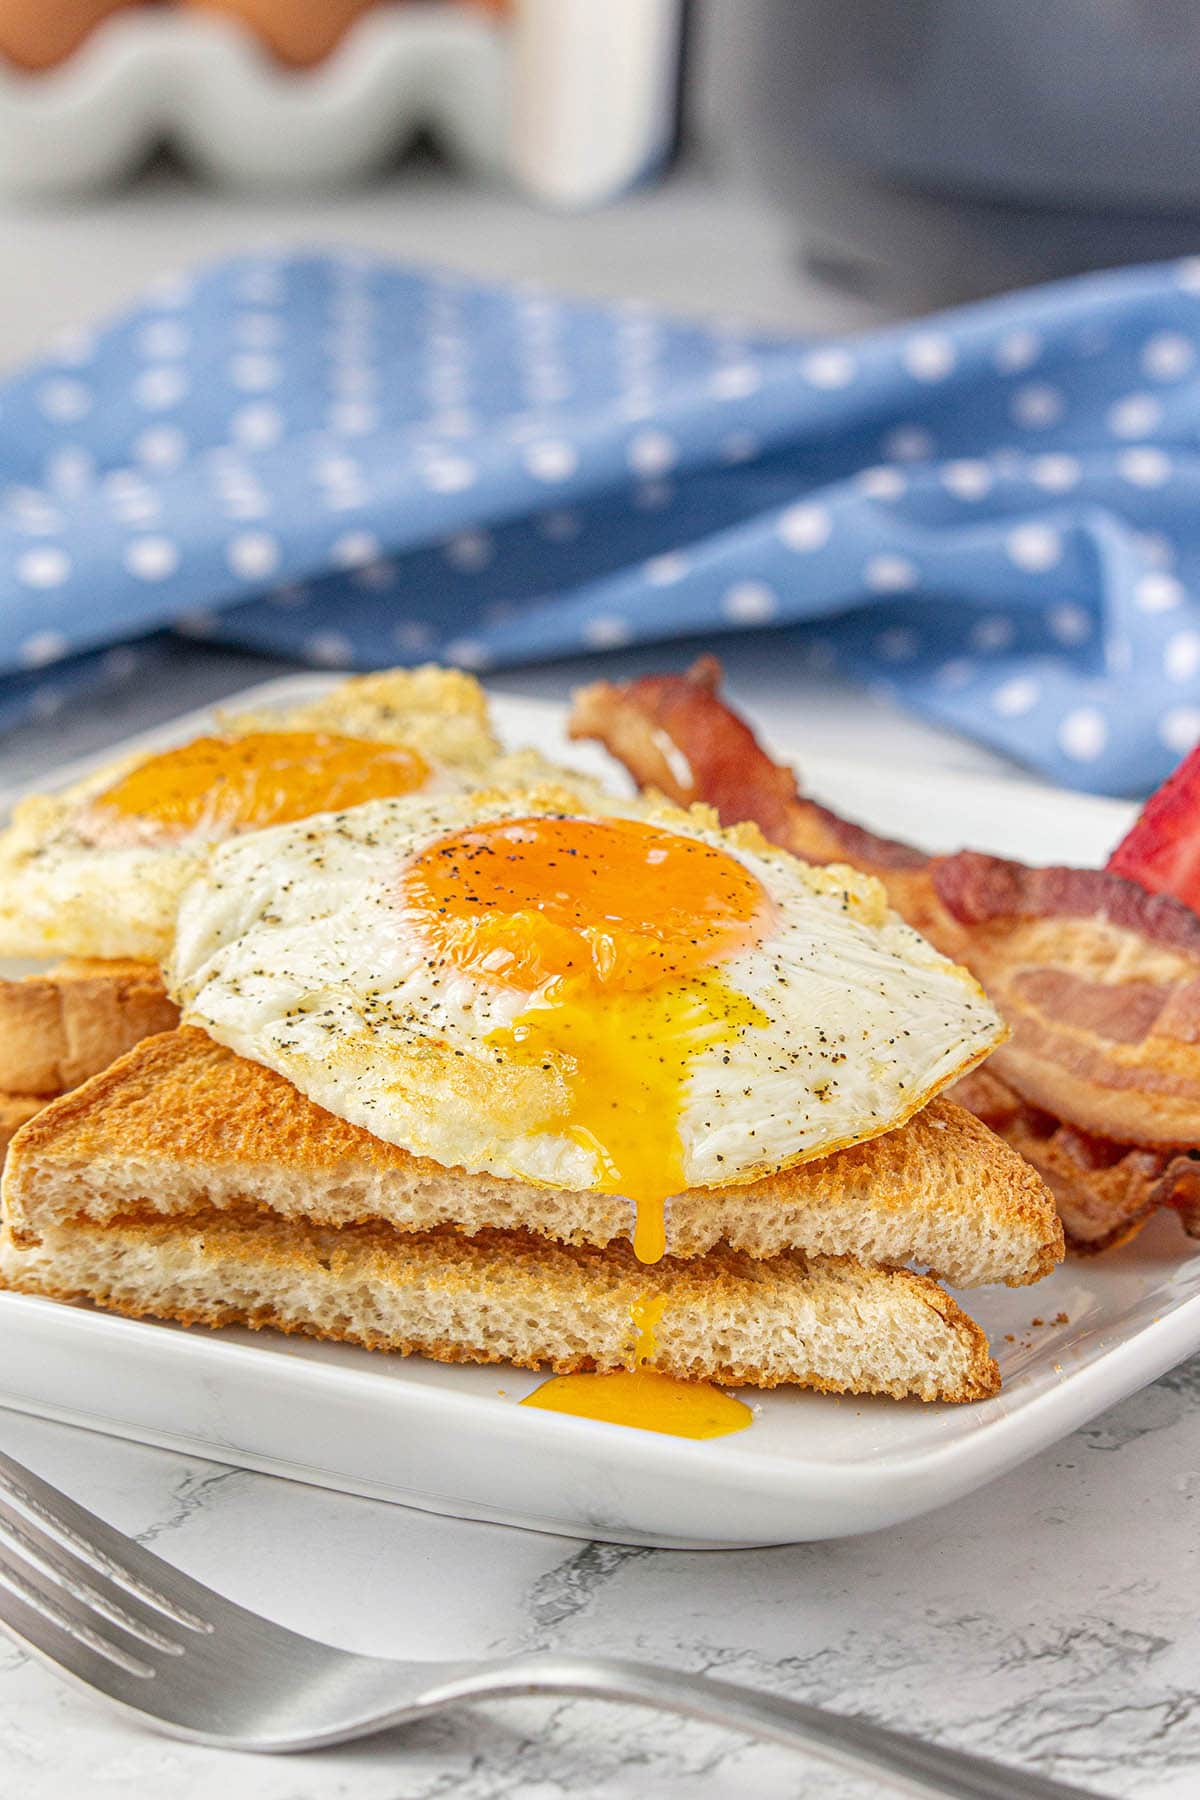 Fried eggs over toast on a plate with bacon.